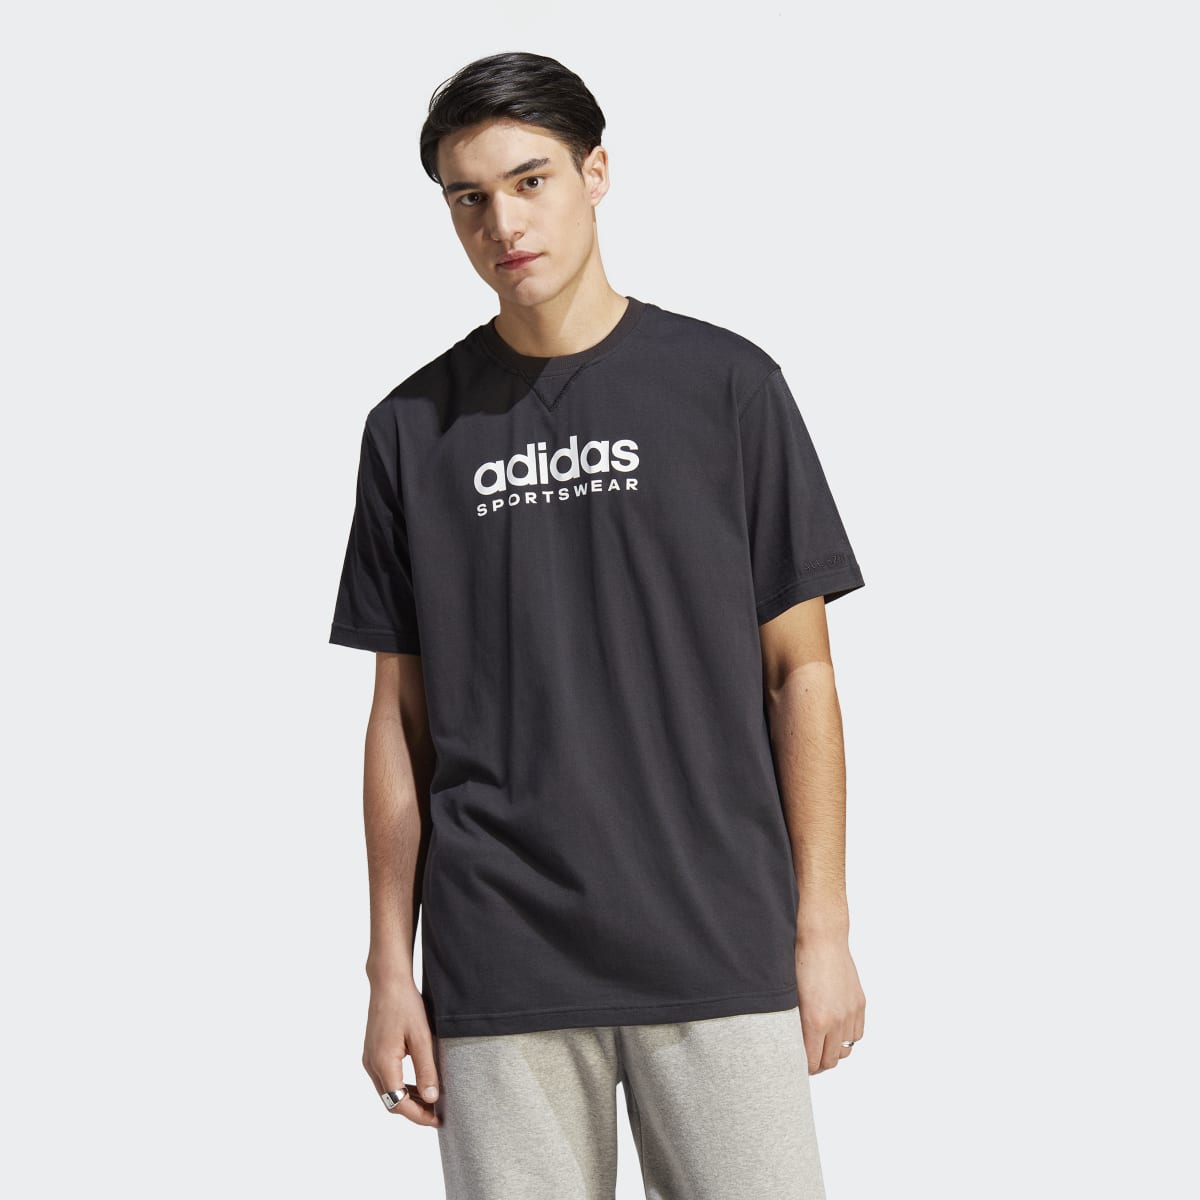 PriceGrabber - All SZN $55 Tee | Graphic | Adidas